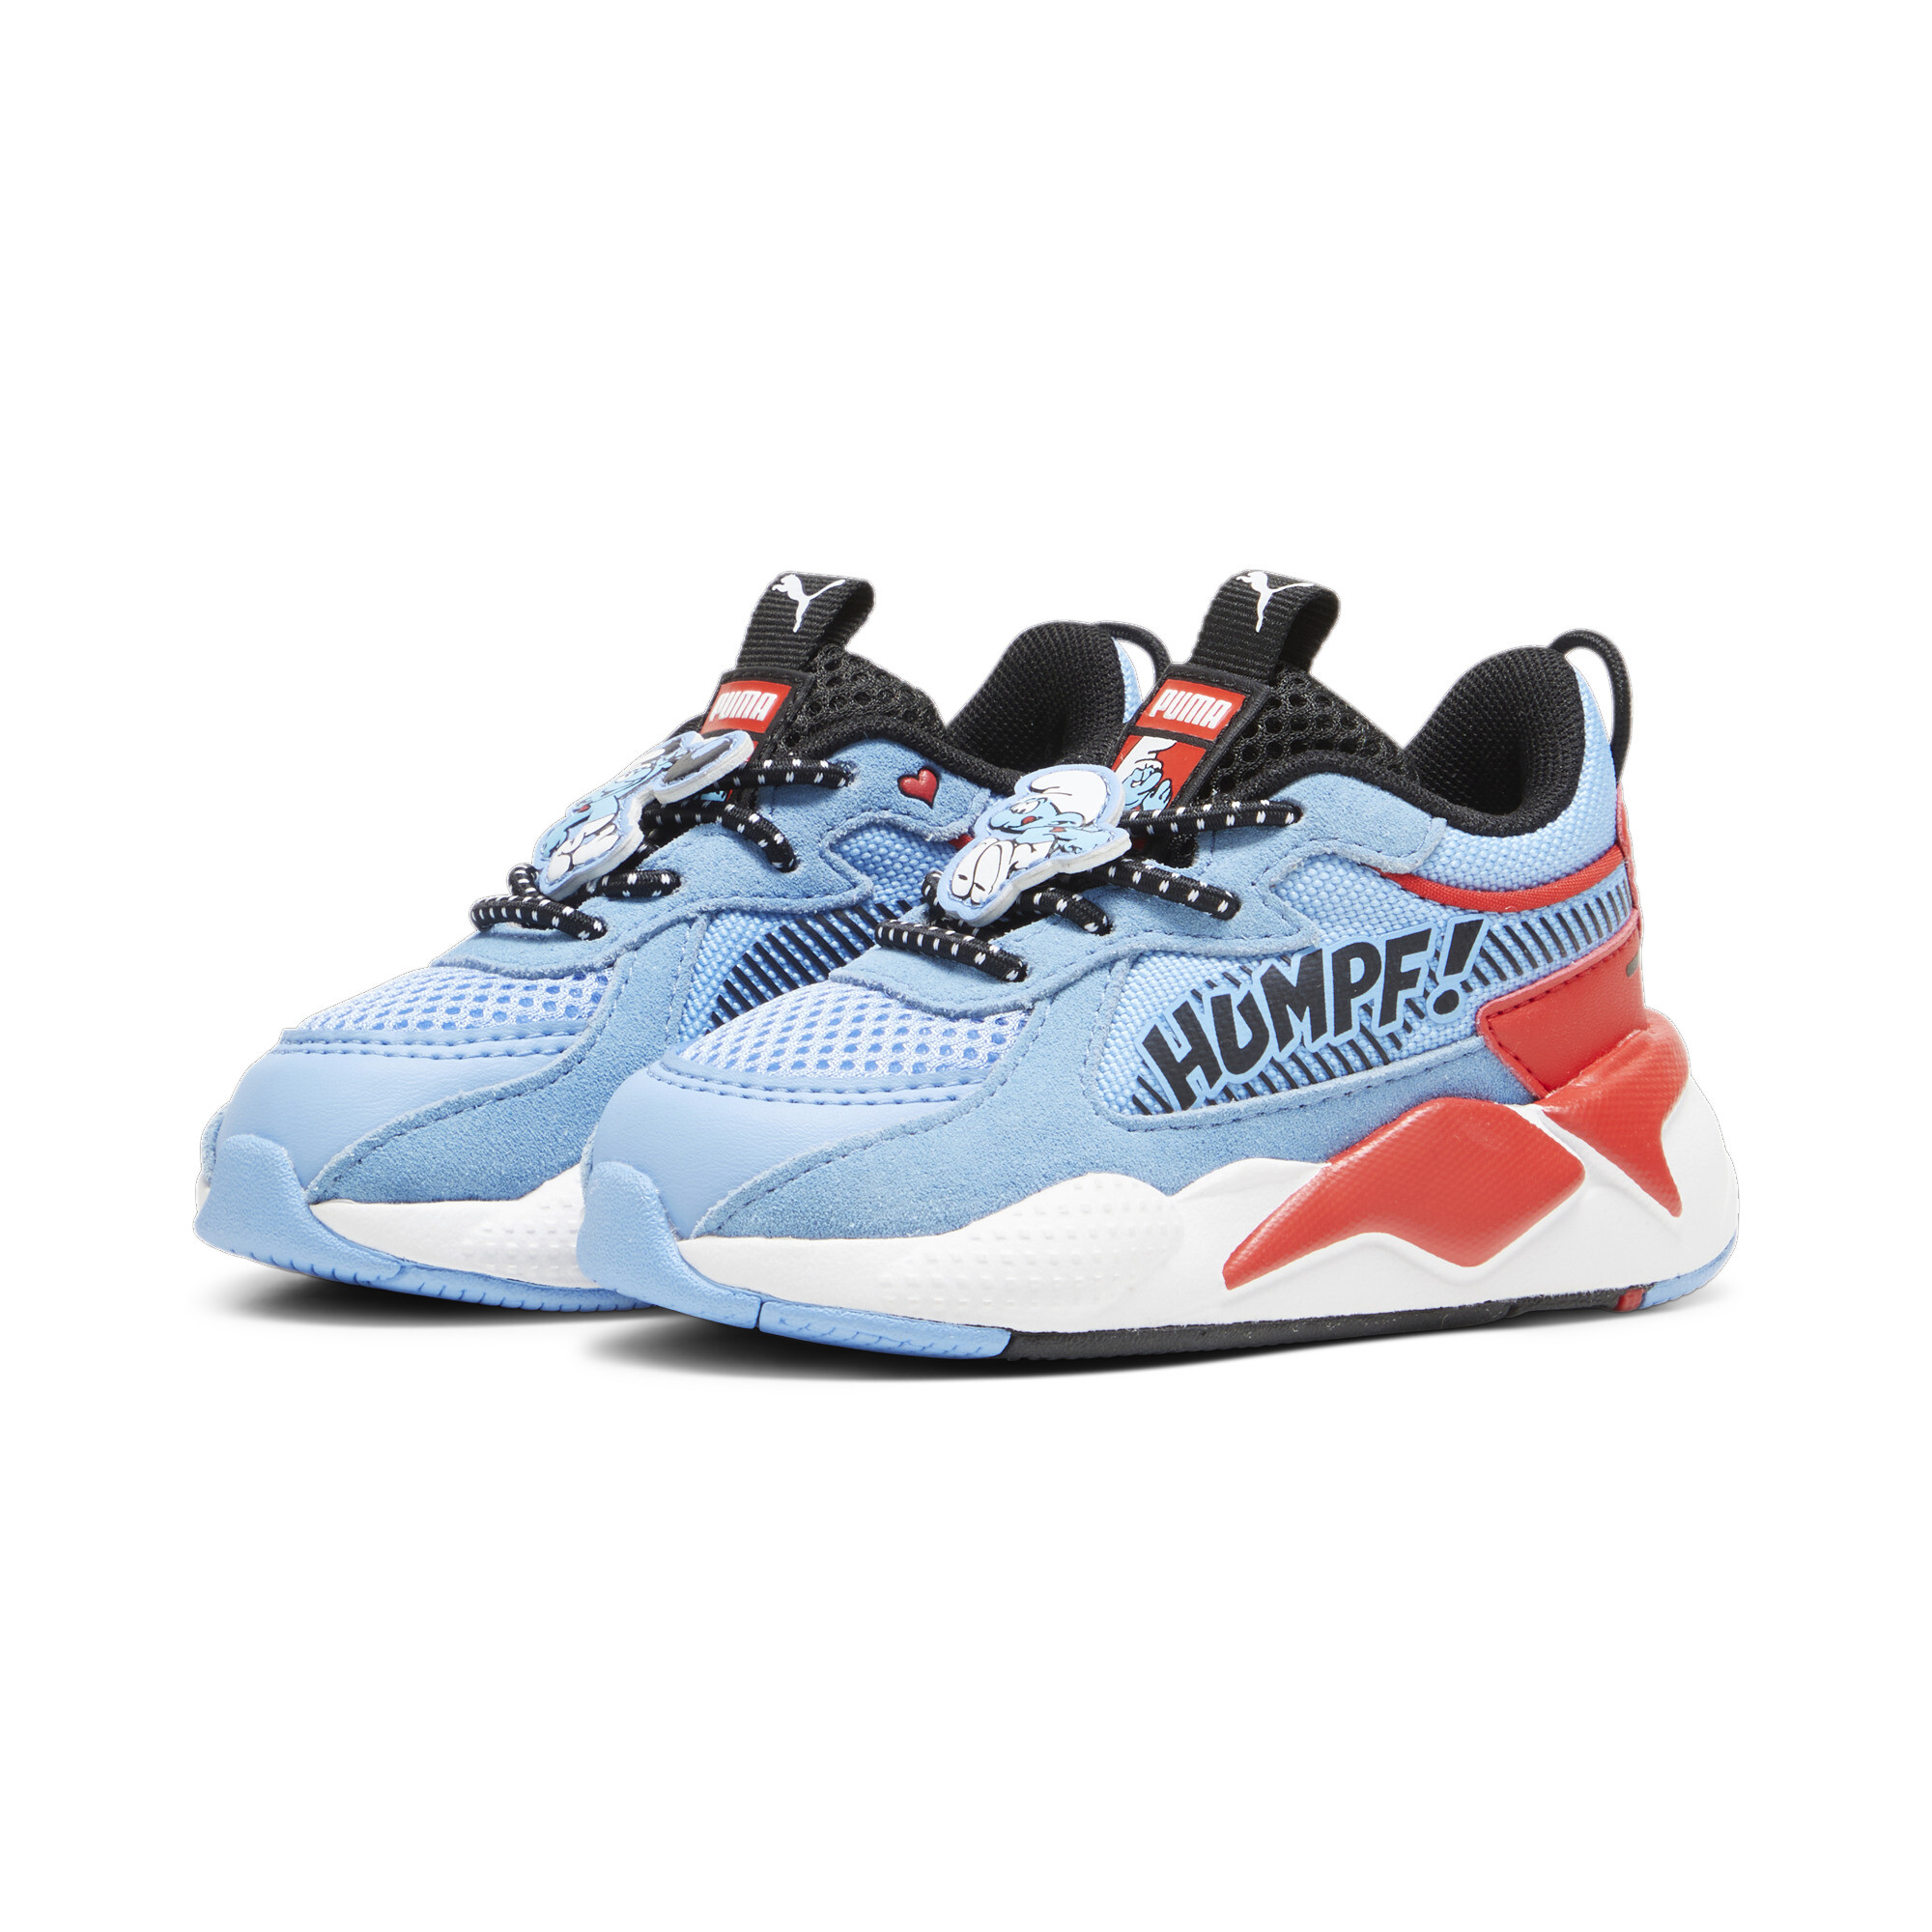 Kids' PUMA X THE SMURFS RS-X Toddlers' Sneakers In Blue, Size EU 21